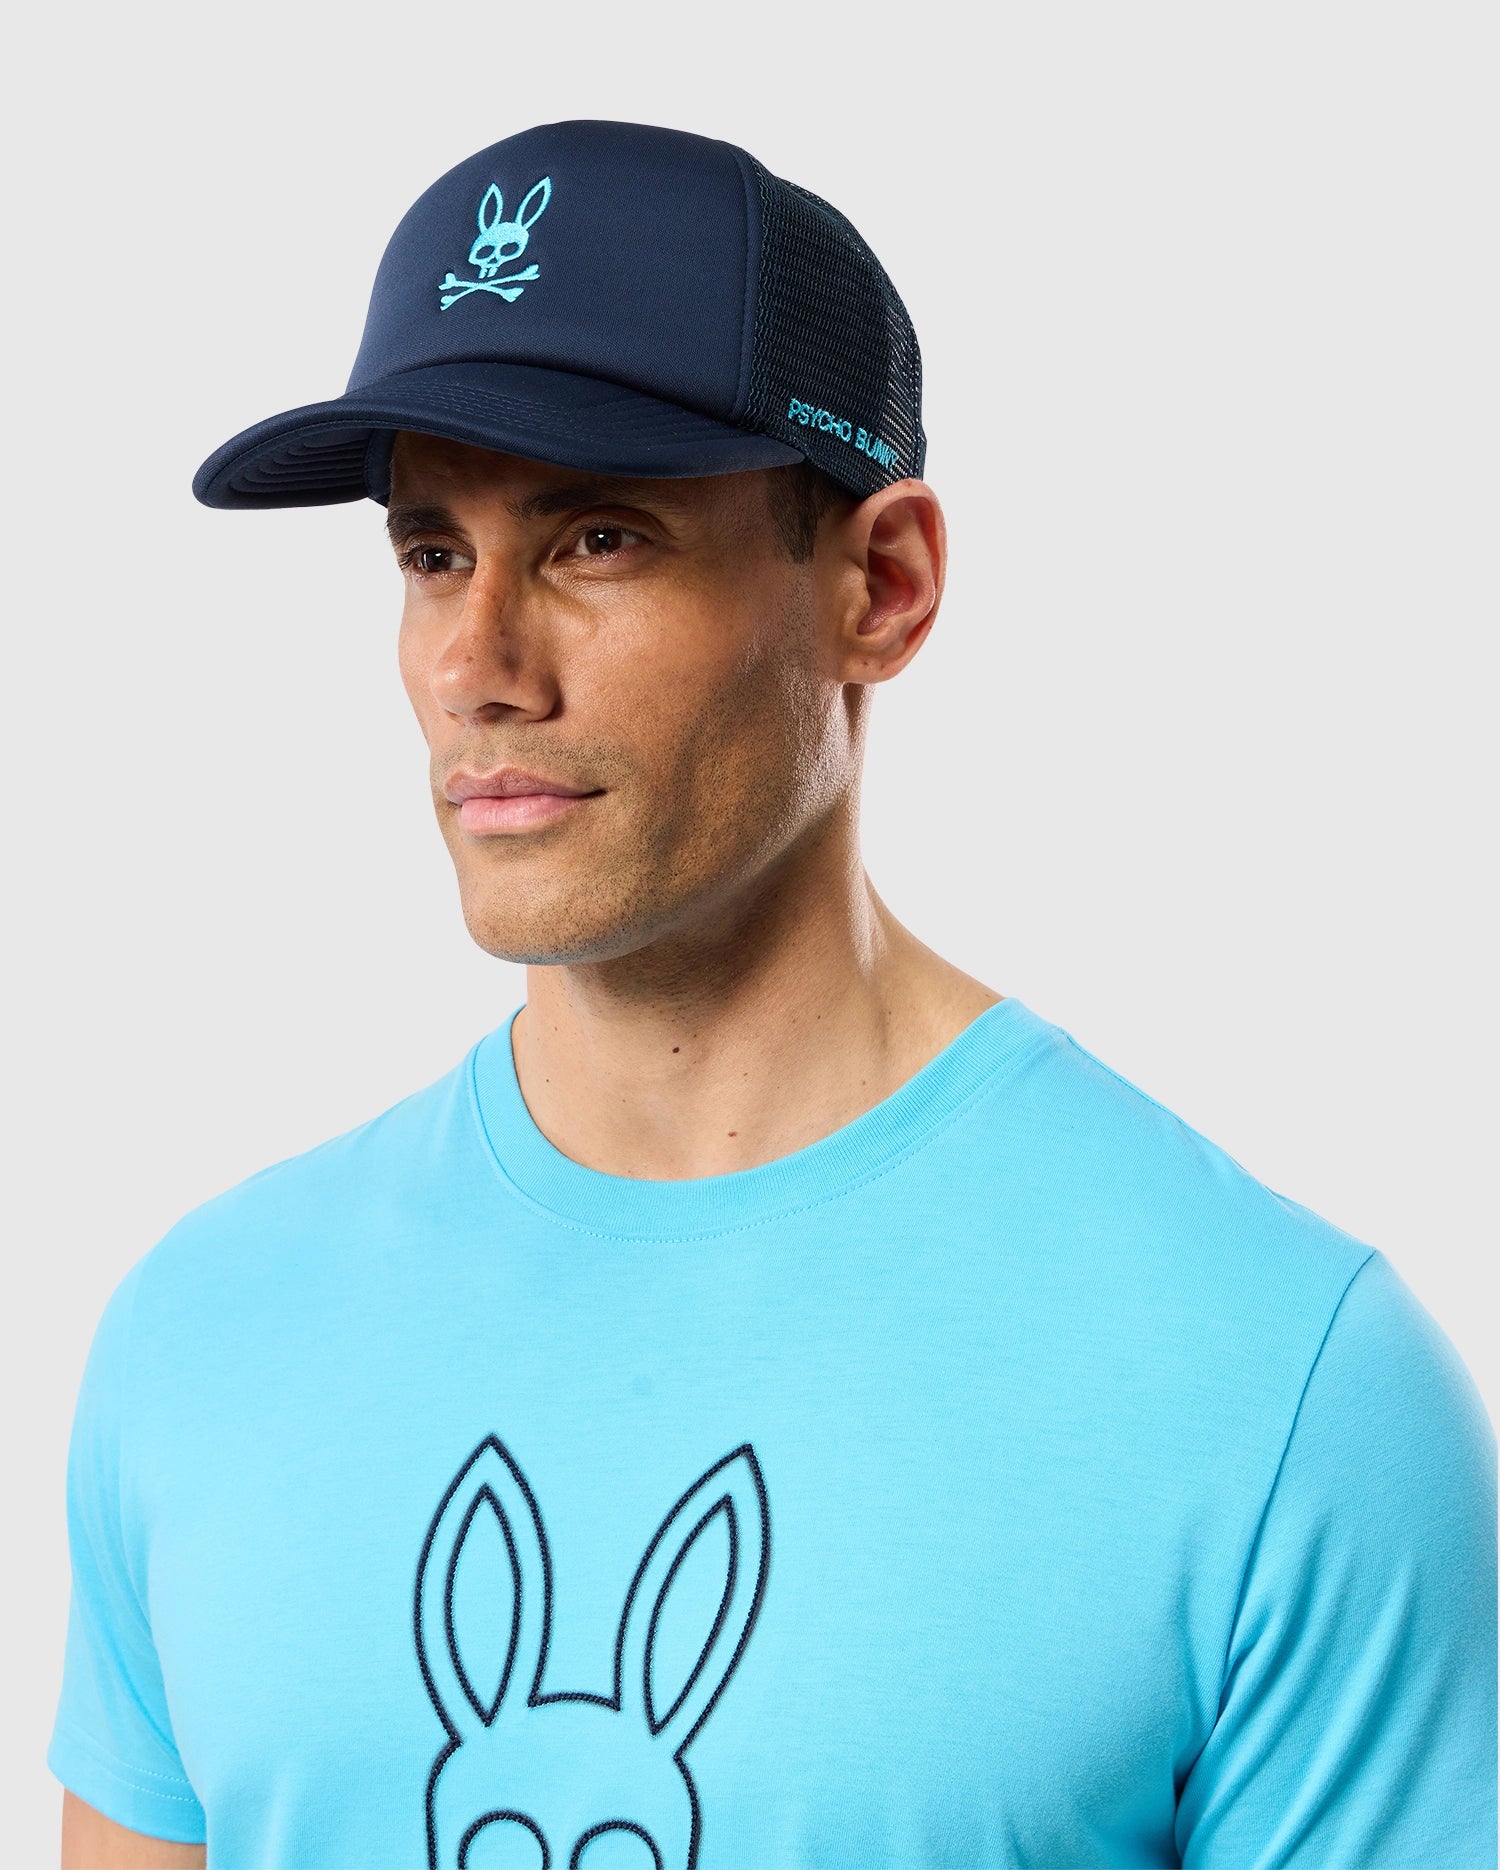 A man wearing a blue Psycho Bunny t-shirt and a navy blue Psycho Bunny MENS PARIS TRUCKER CAP - B6A591C200 with bunny logo mesh paneling. The background is plain light gray.